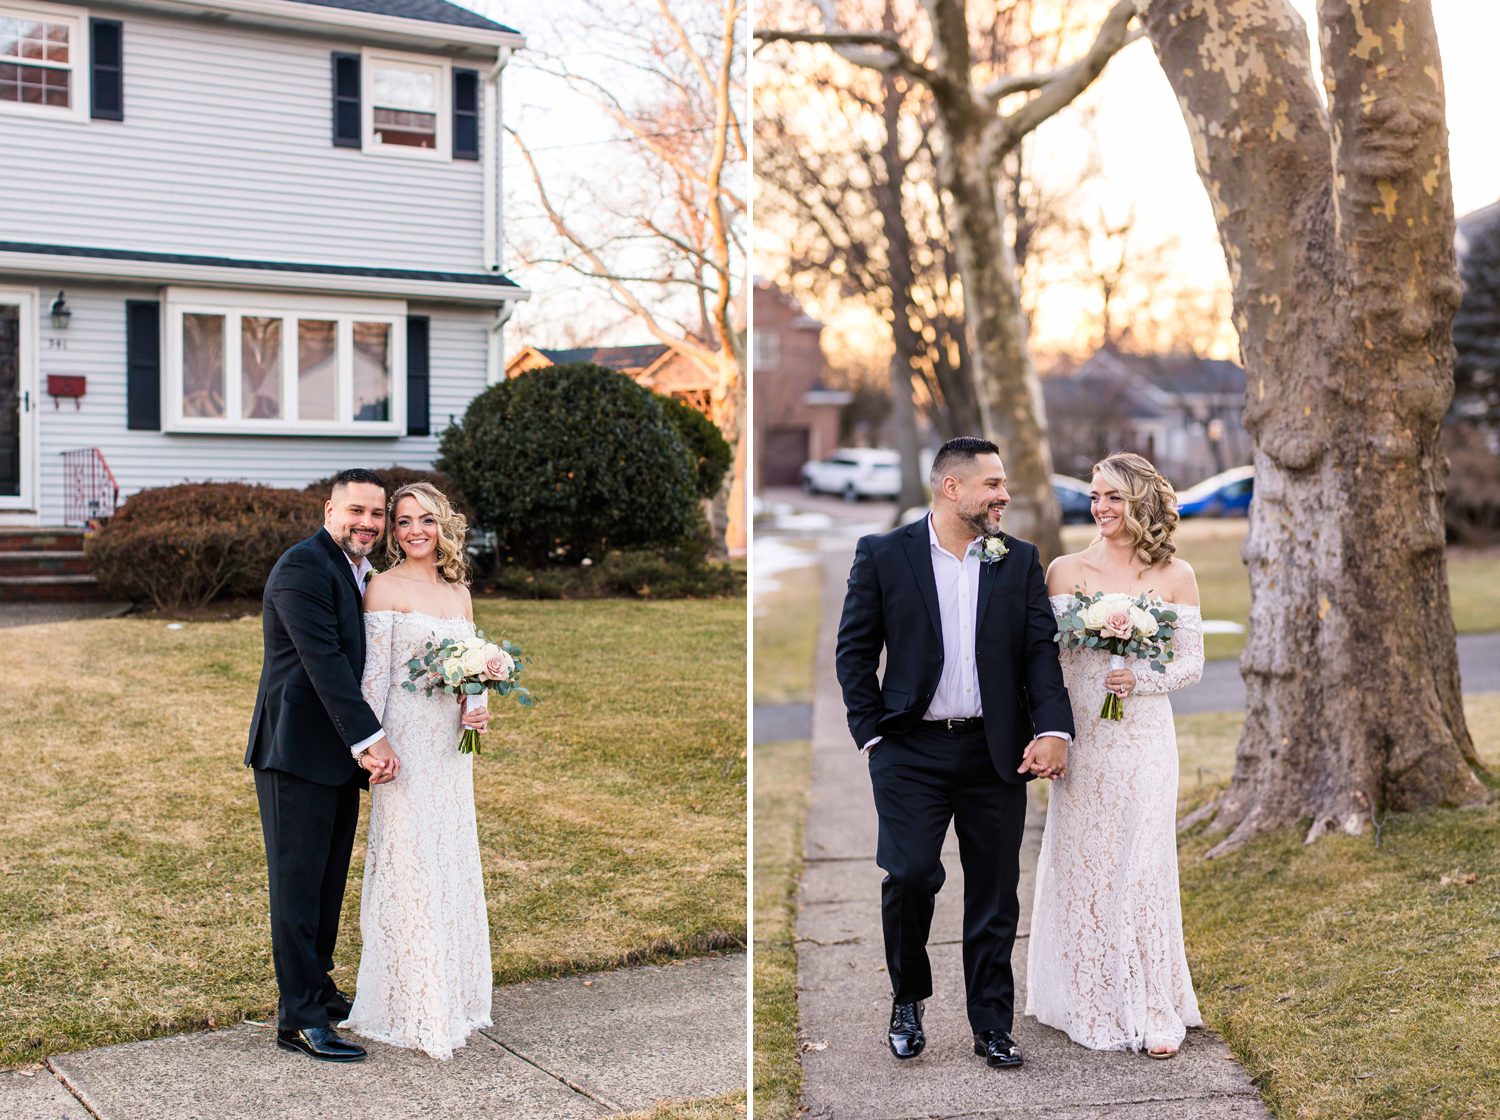 Sunset portraits outside their home after the elopement.